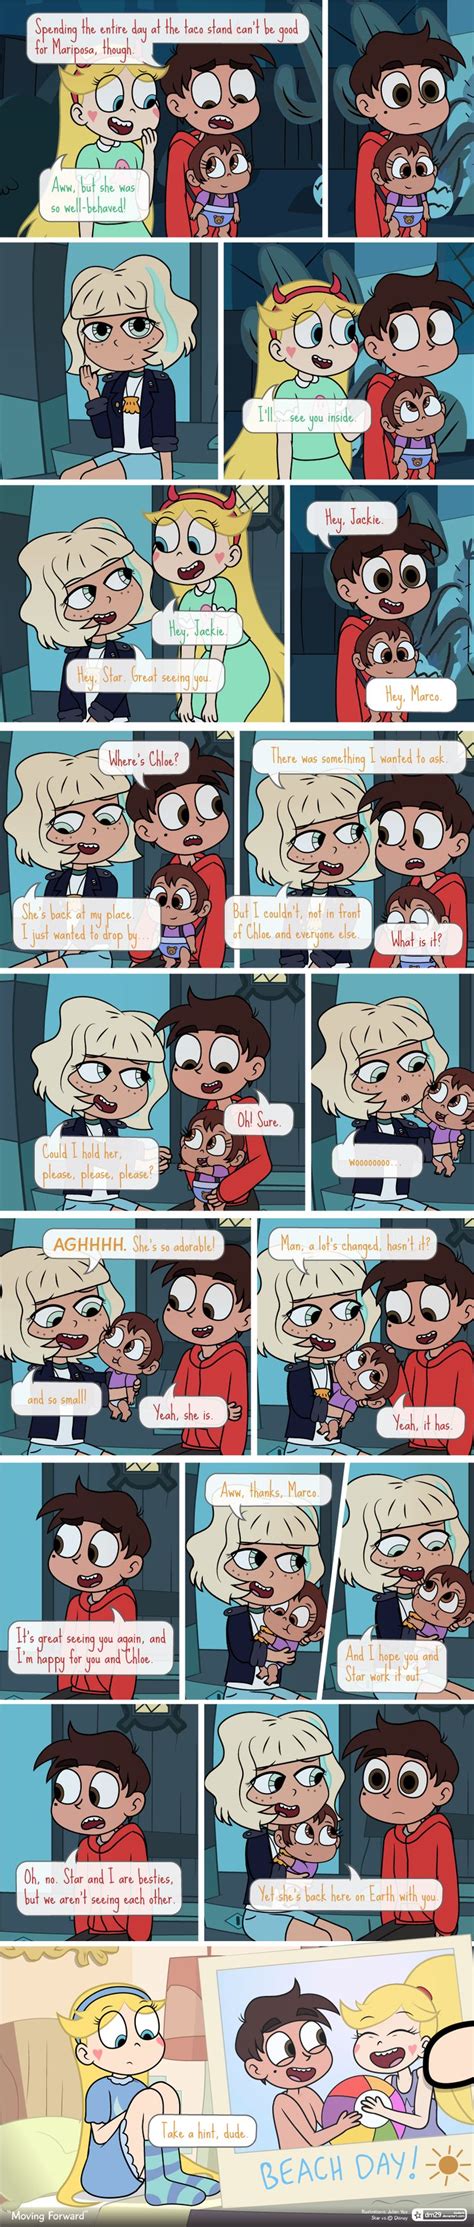 Moving Forward By Dm29 On Deviantart Star Vs The Forces Star Vs The